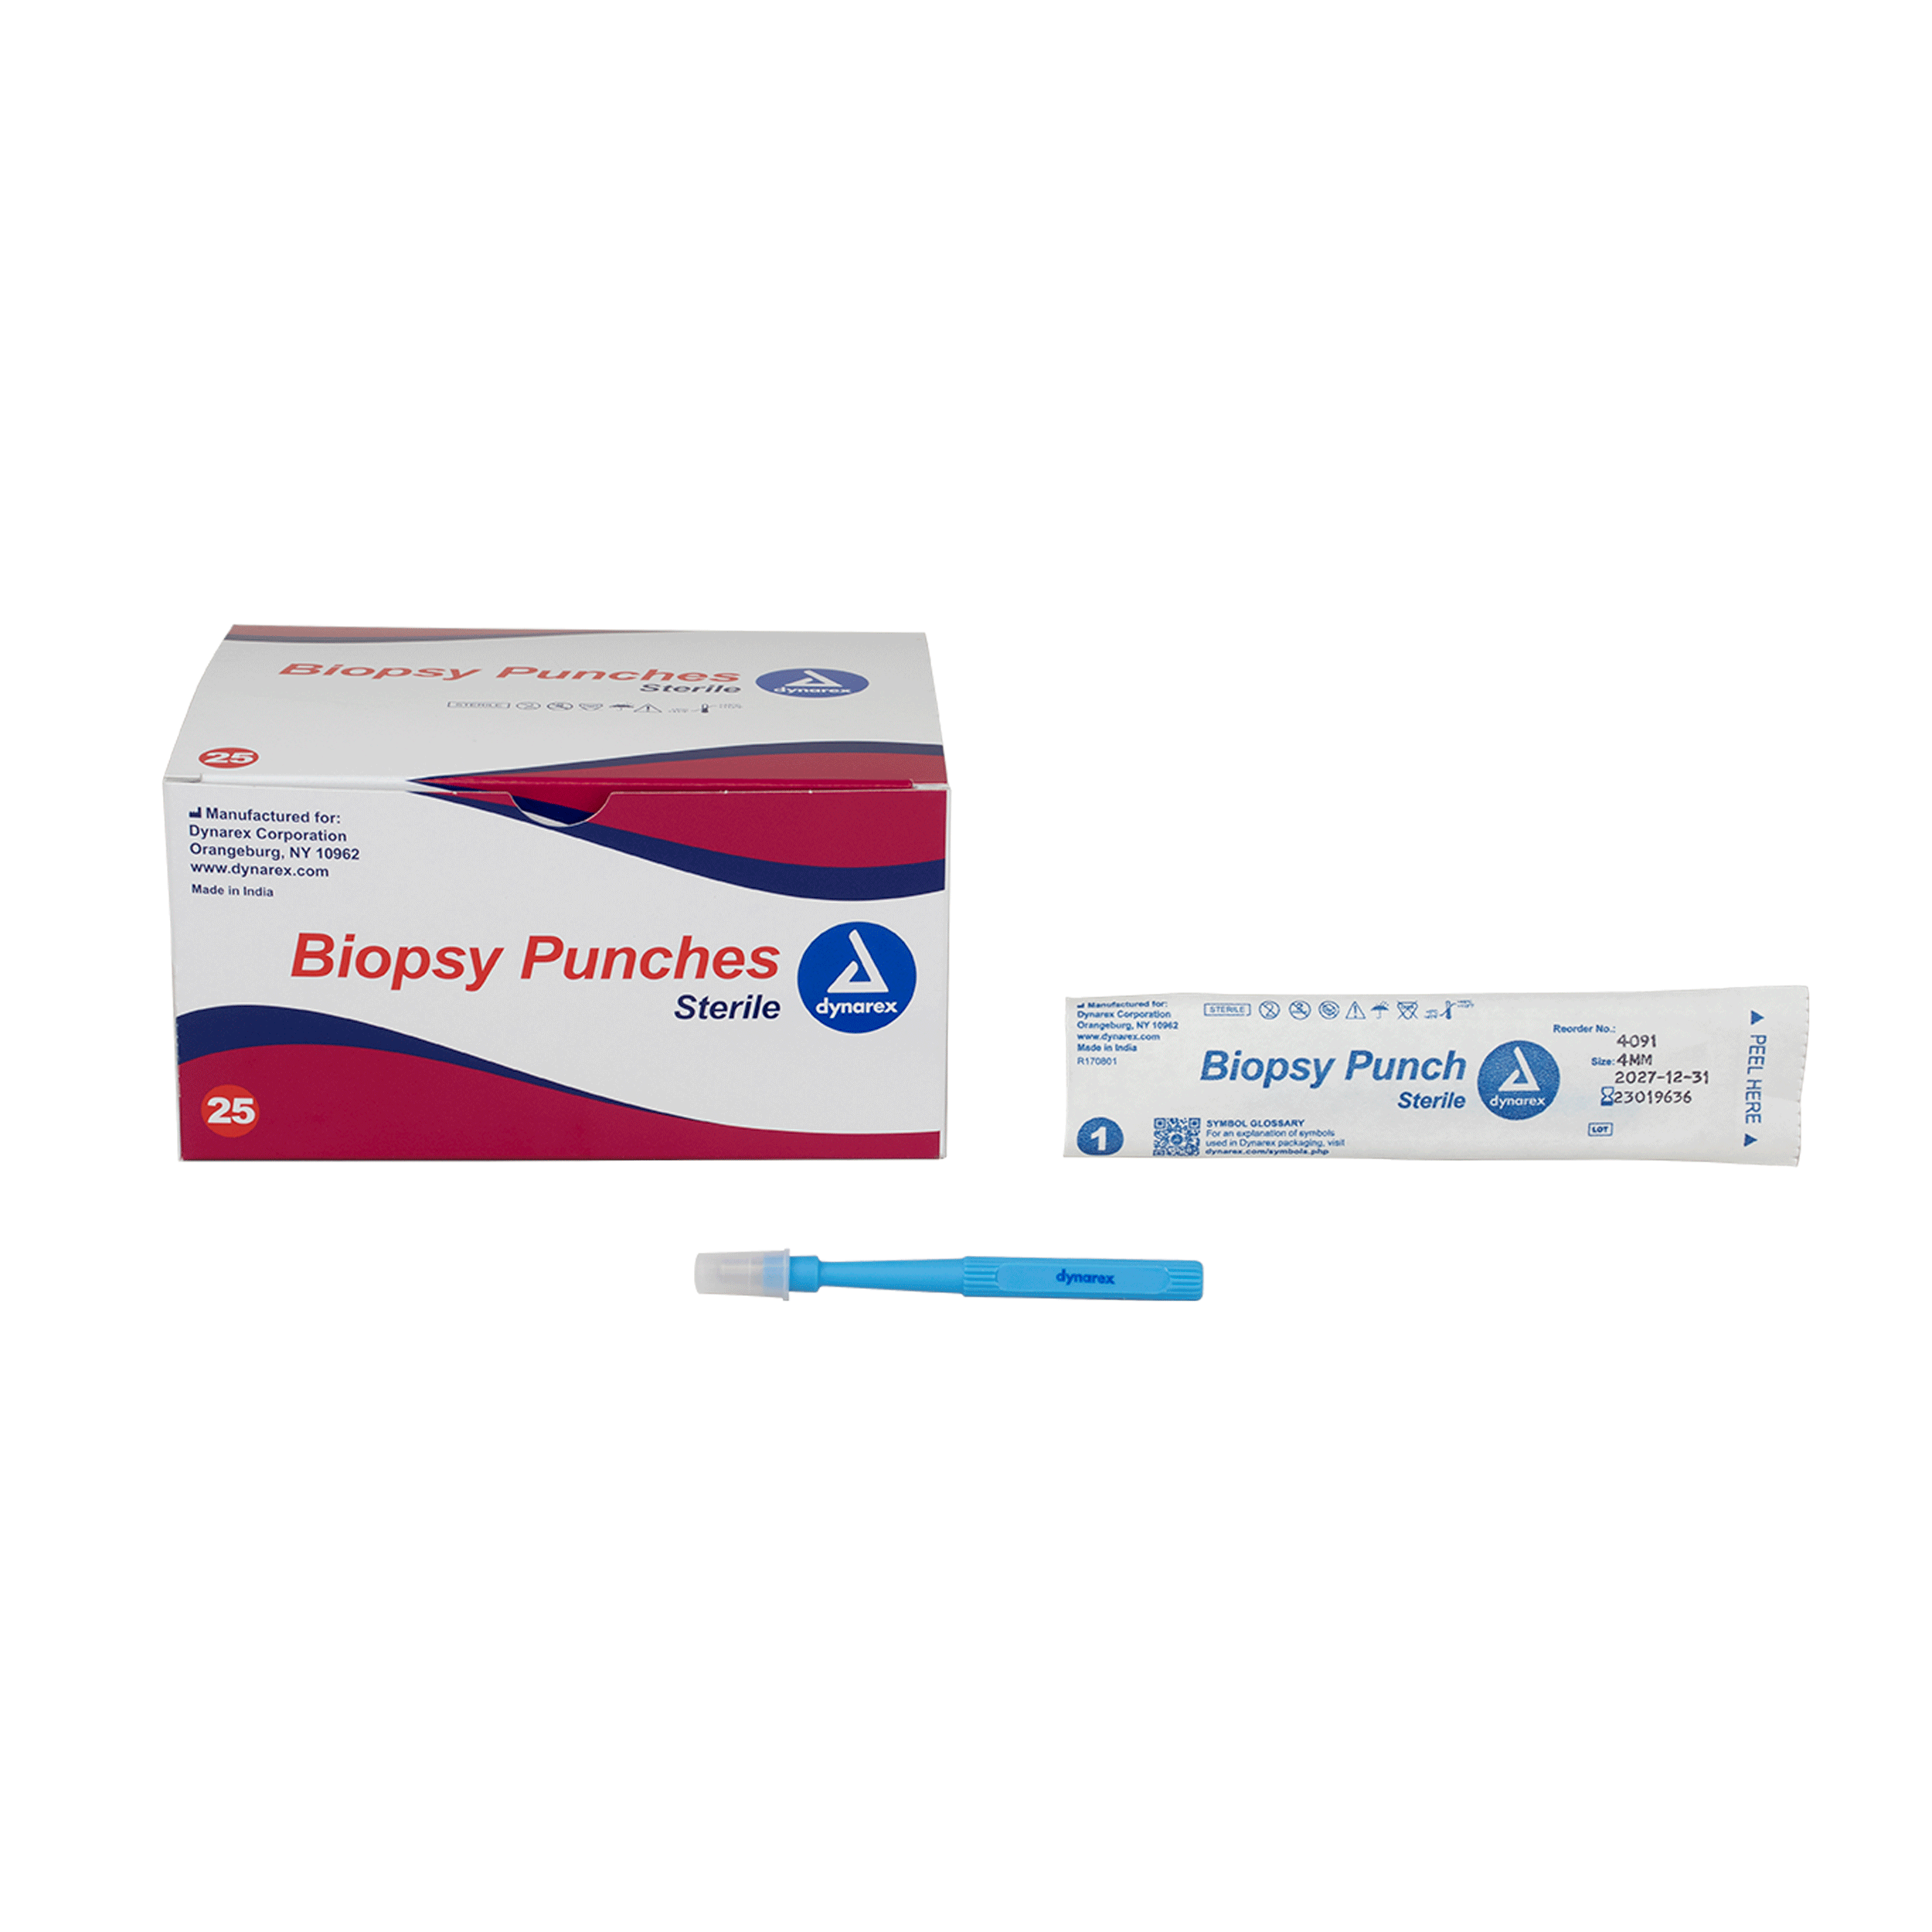 Biopsy Punches 4.0mm, Blue